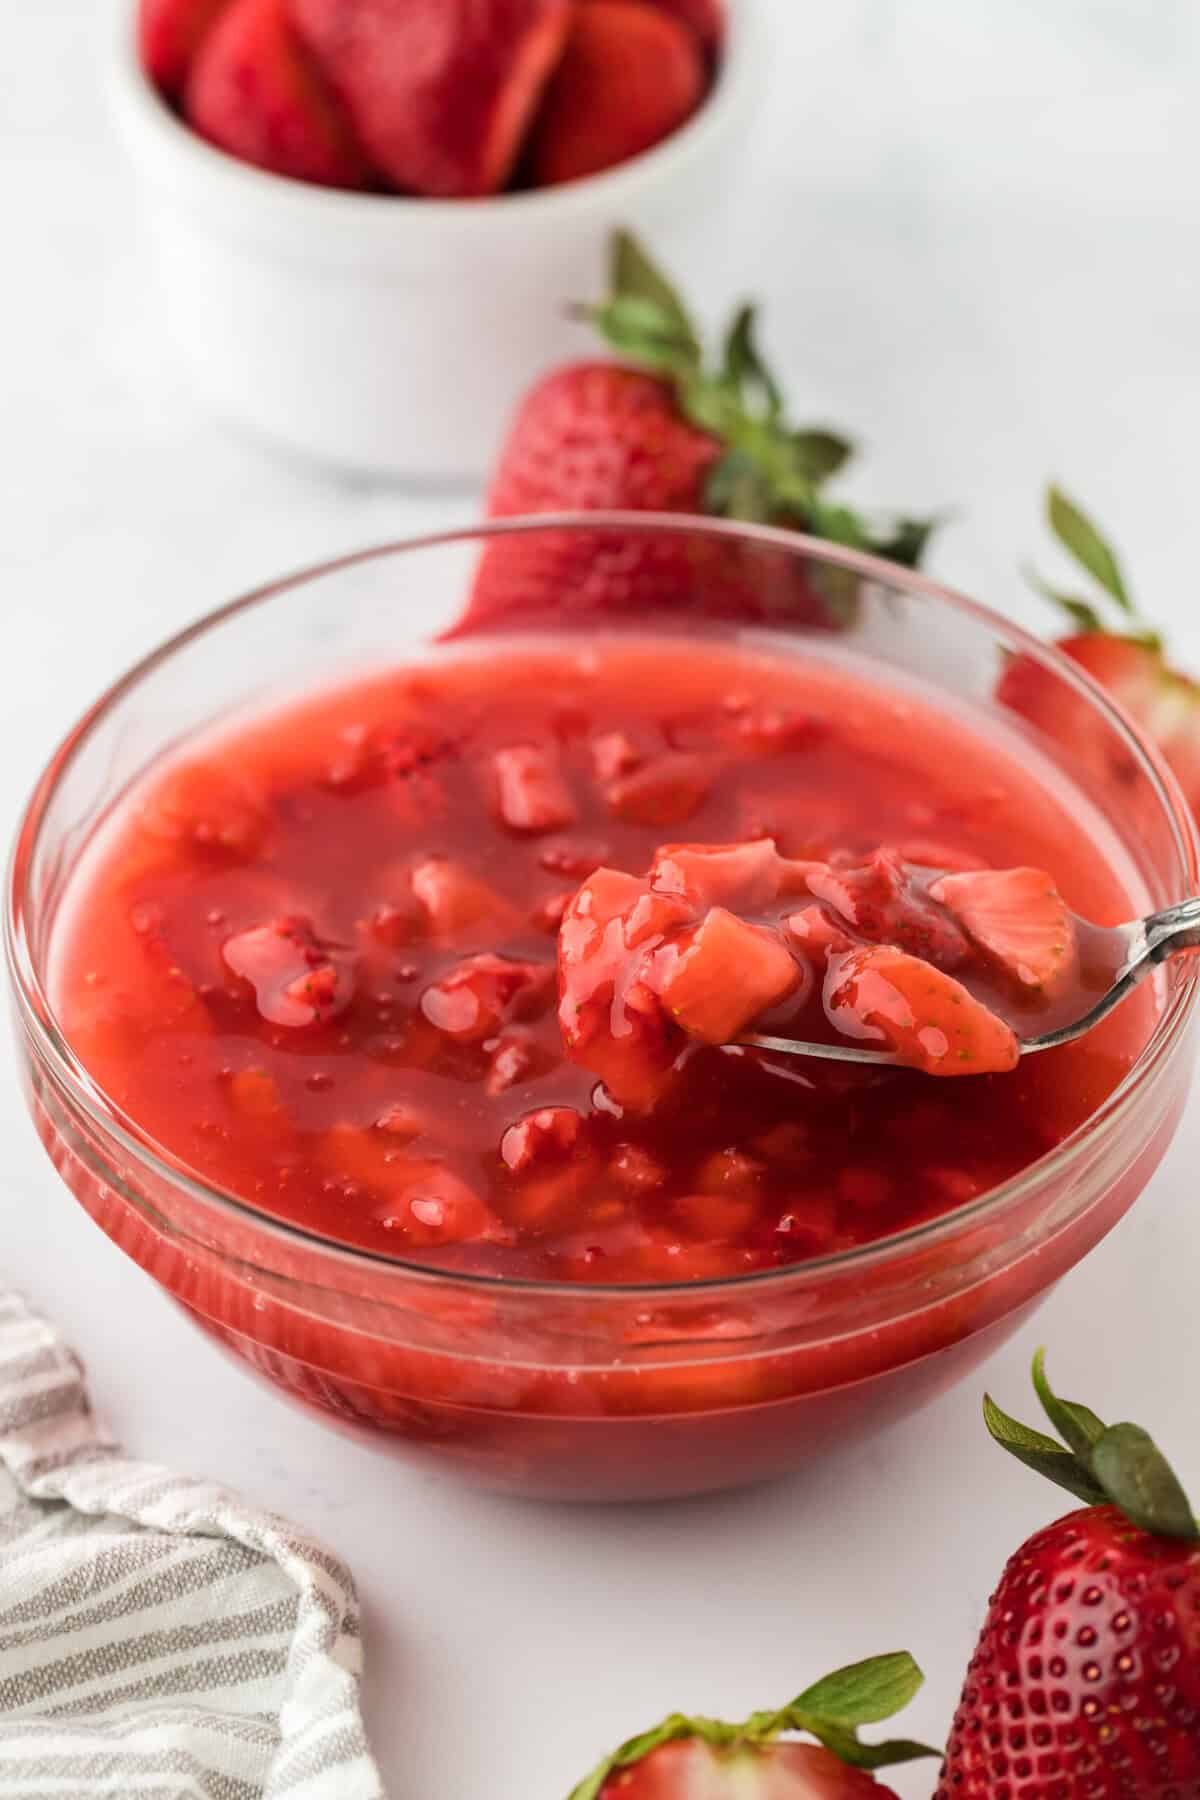 A spoon lifting a portion of strawberry sauce from a clear glass bowl. The bowl is surrounded by whole and halved fresh strawberries.